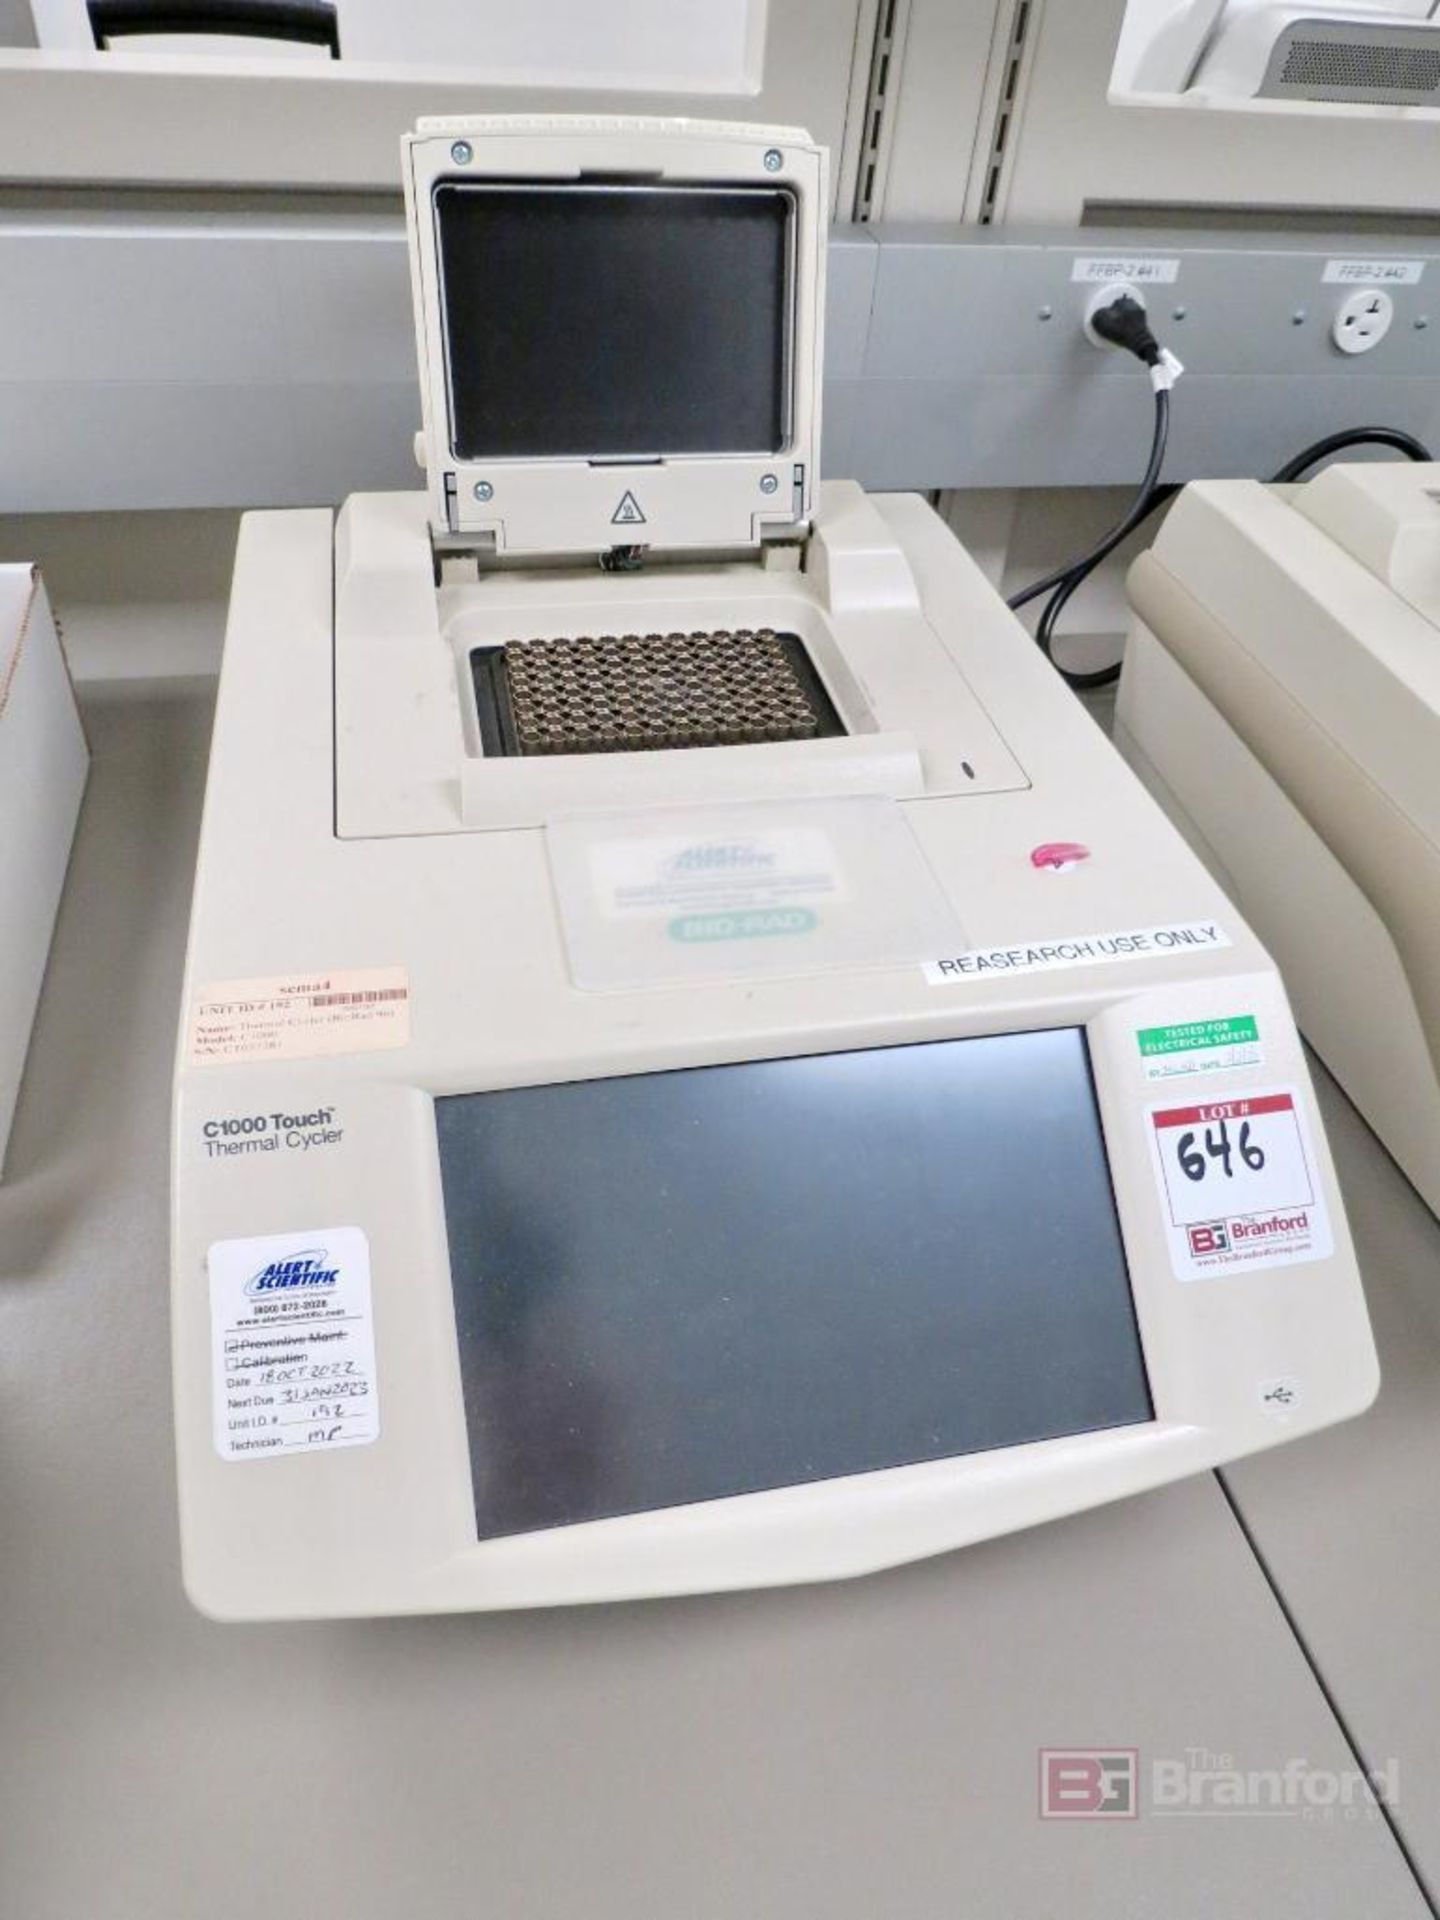 Bio-Rad C1000 Touch 96-Well Thermal Cycler